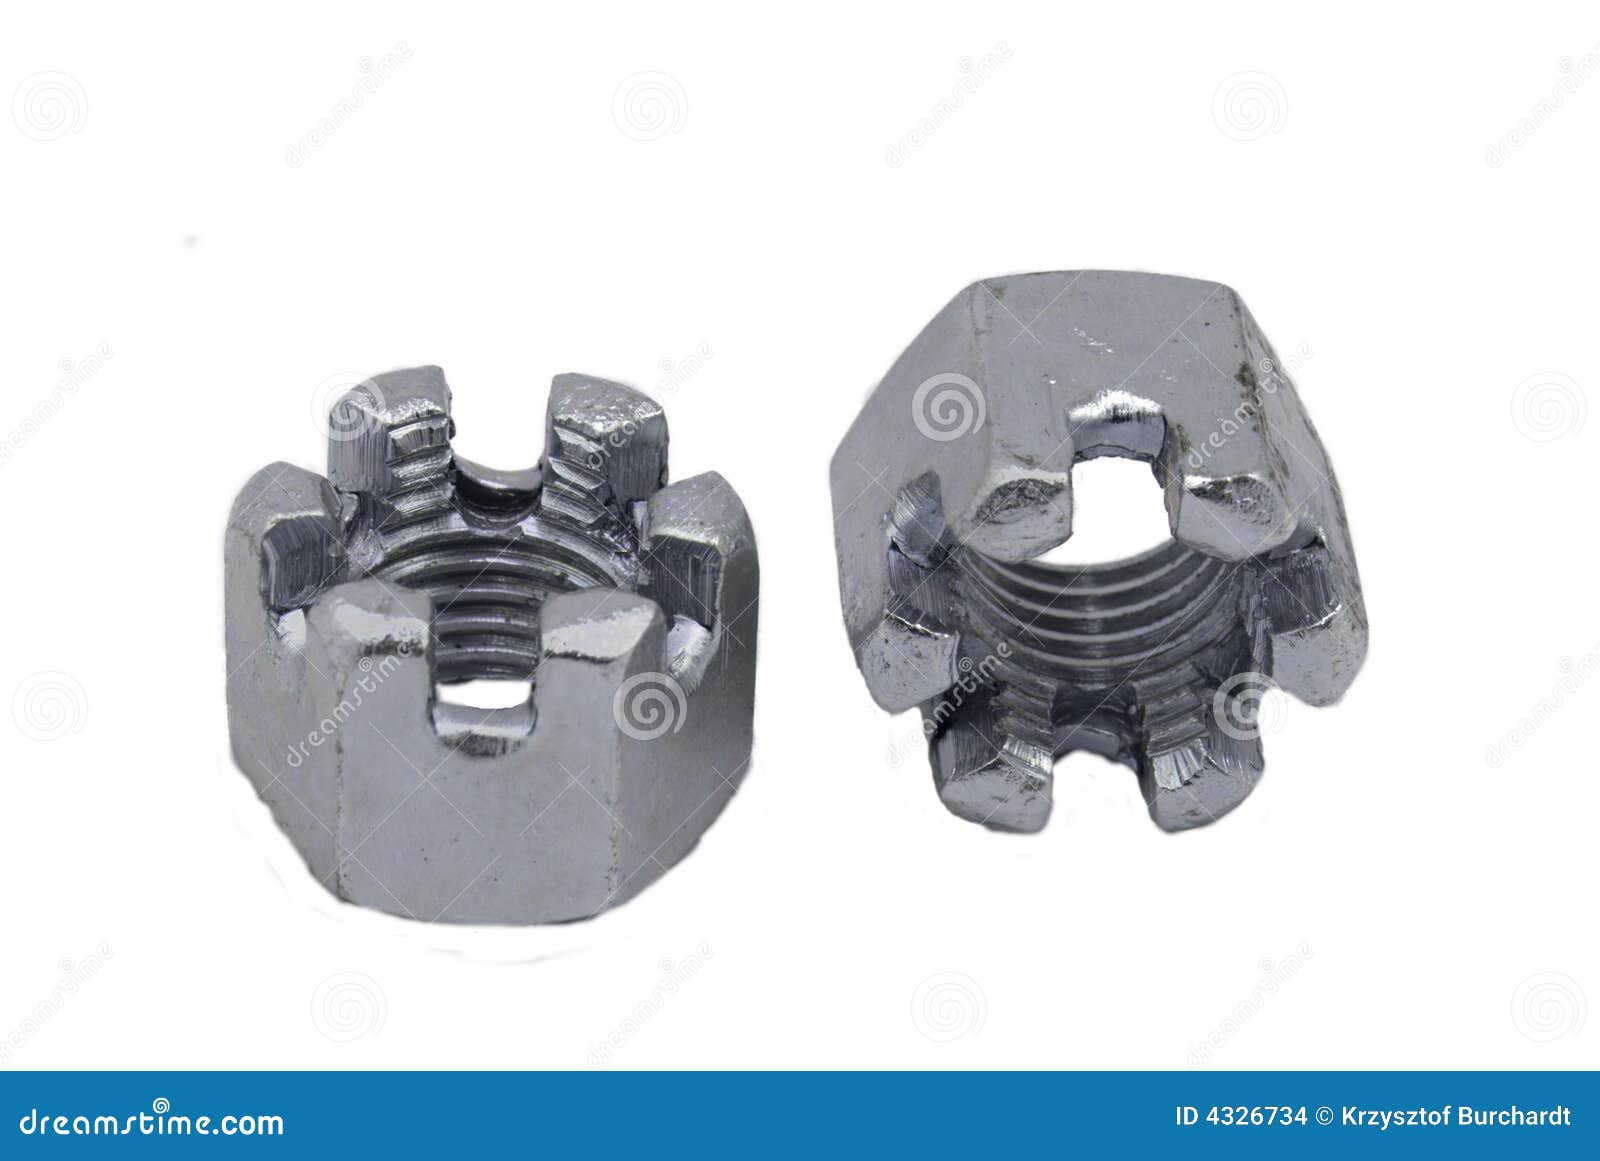 hexagon slotted nuts